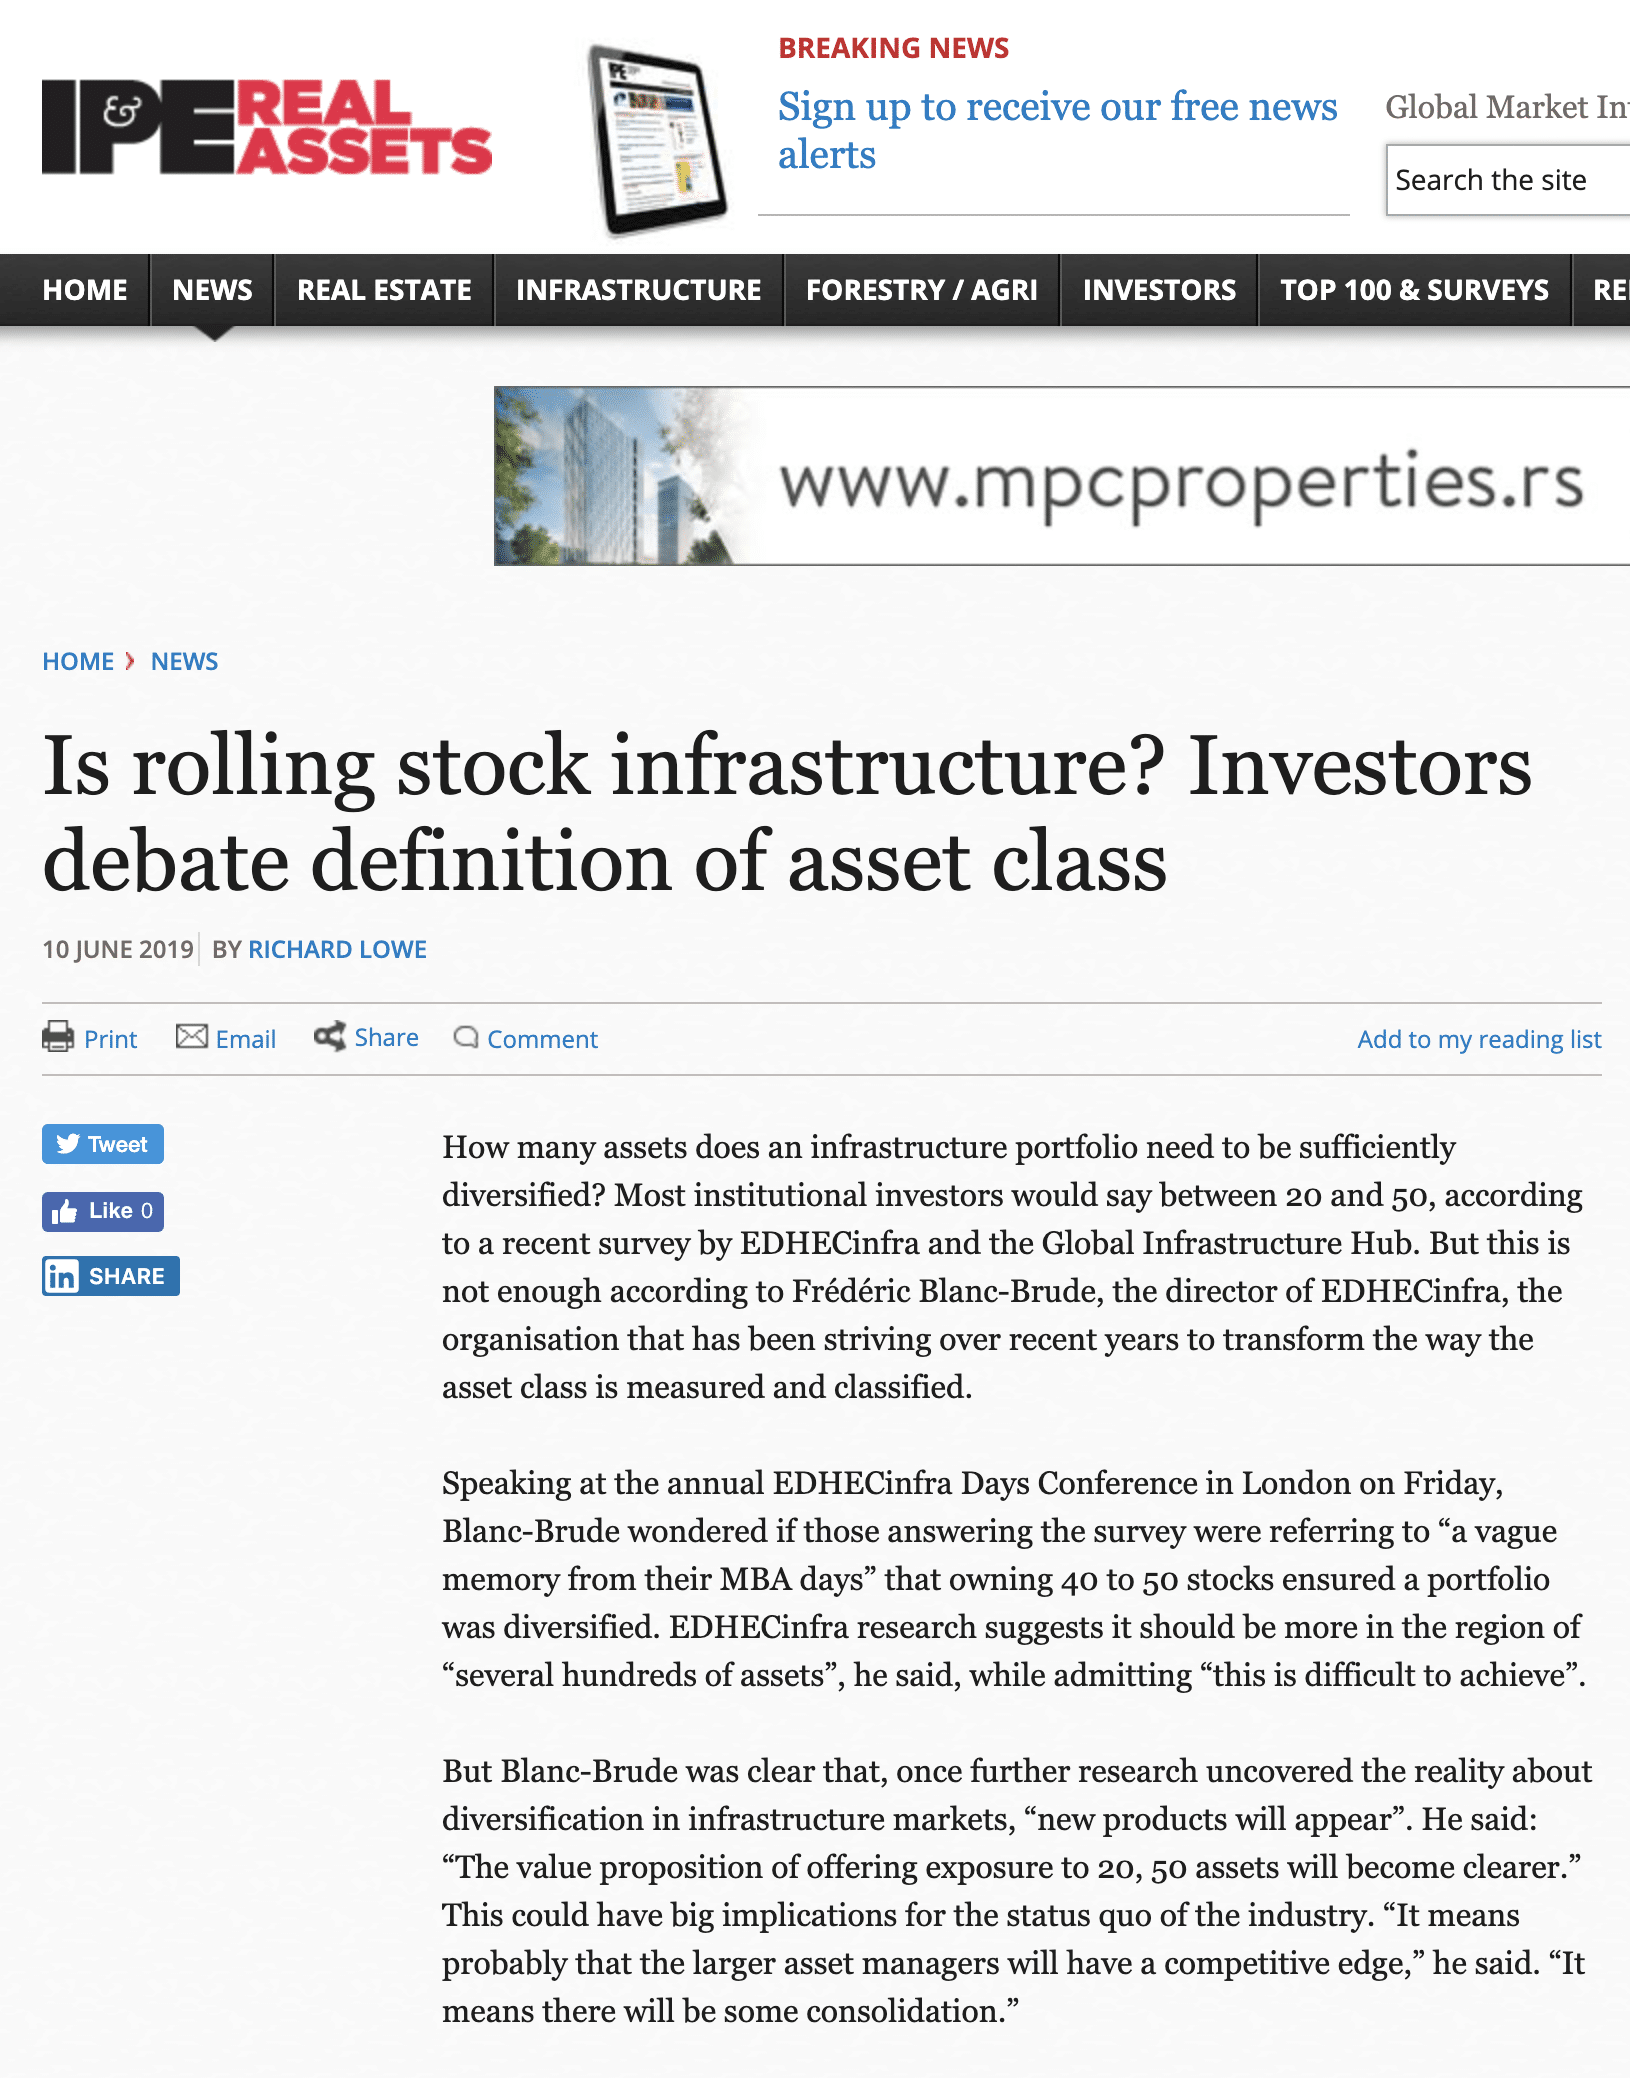 IP&E Real Assets: Is rolling stock infrastructure?